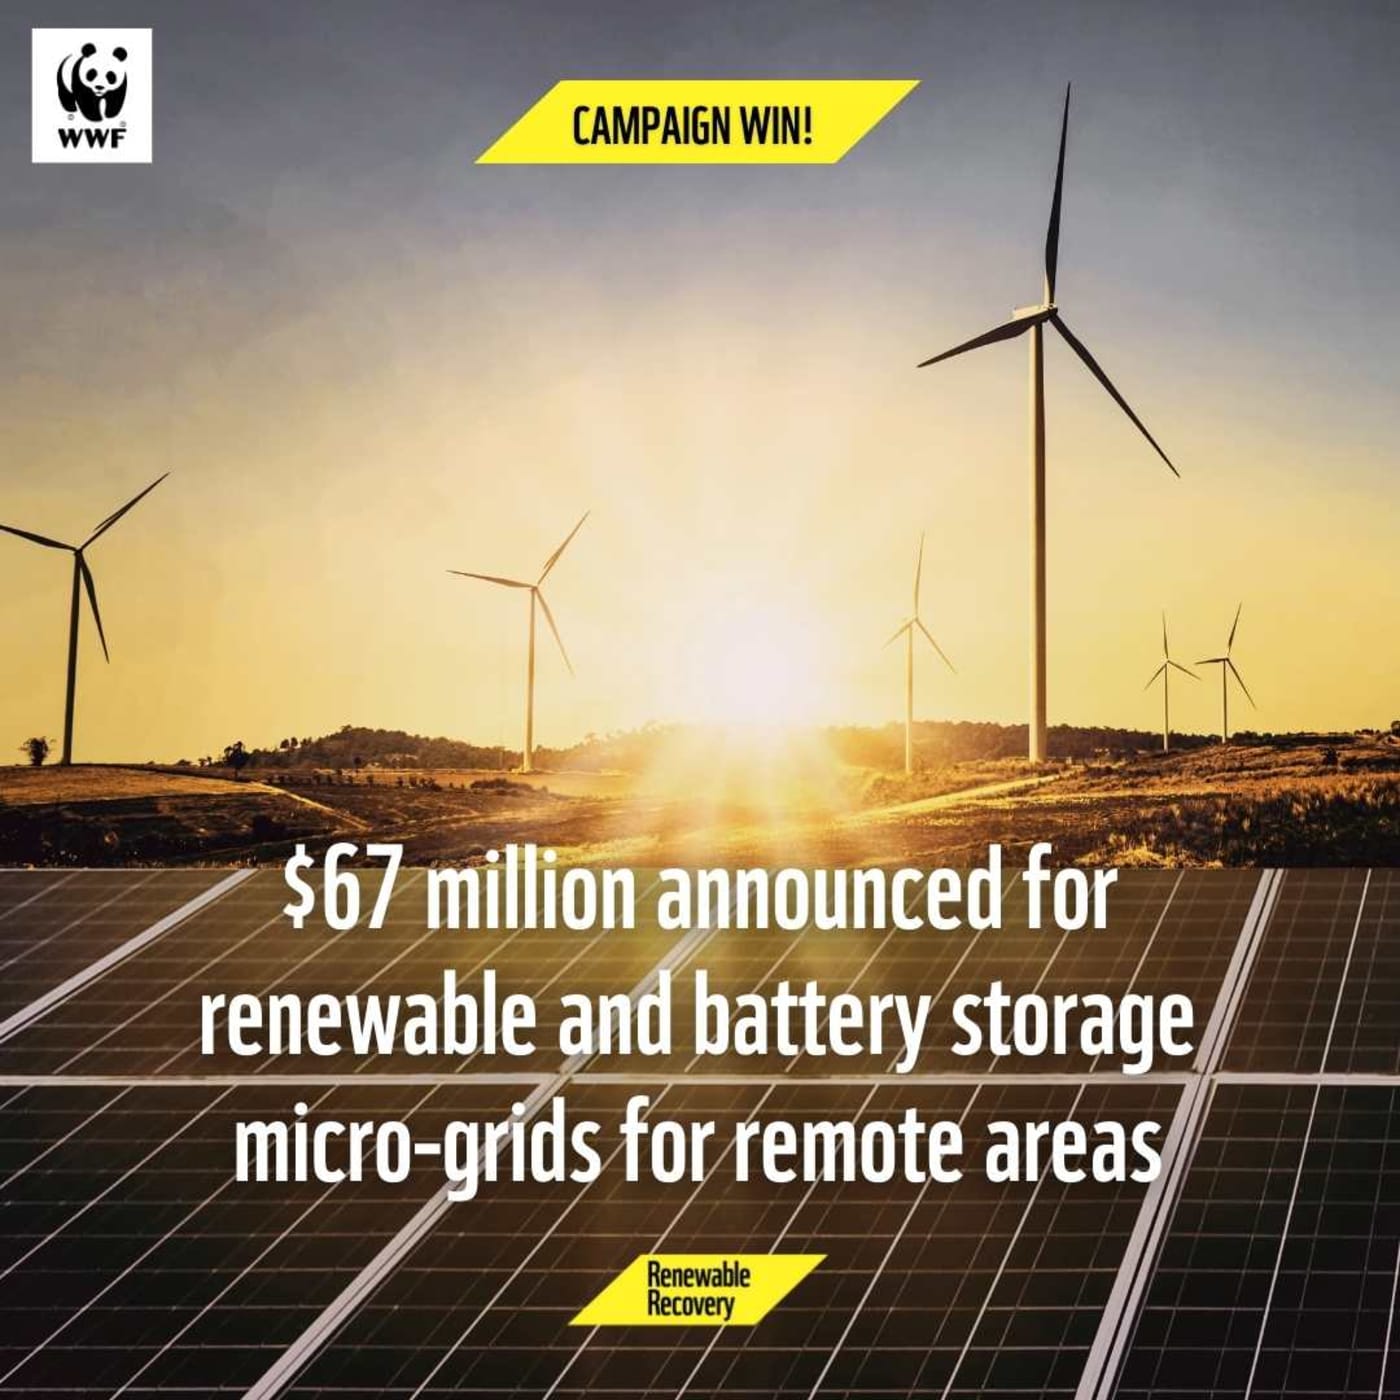 Battery storage micro-grids announced for remote areas